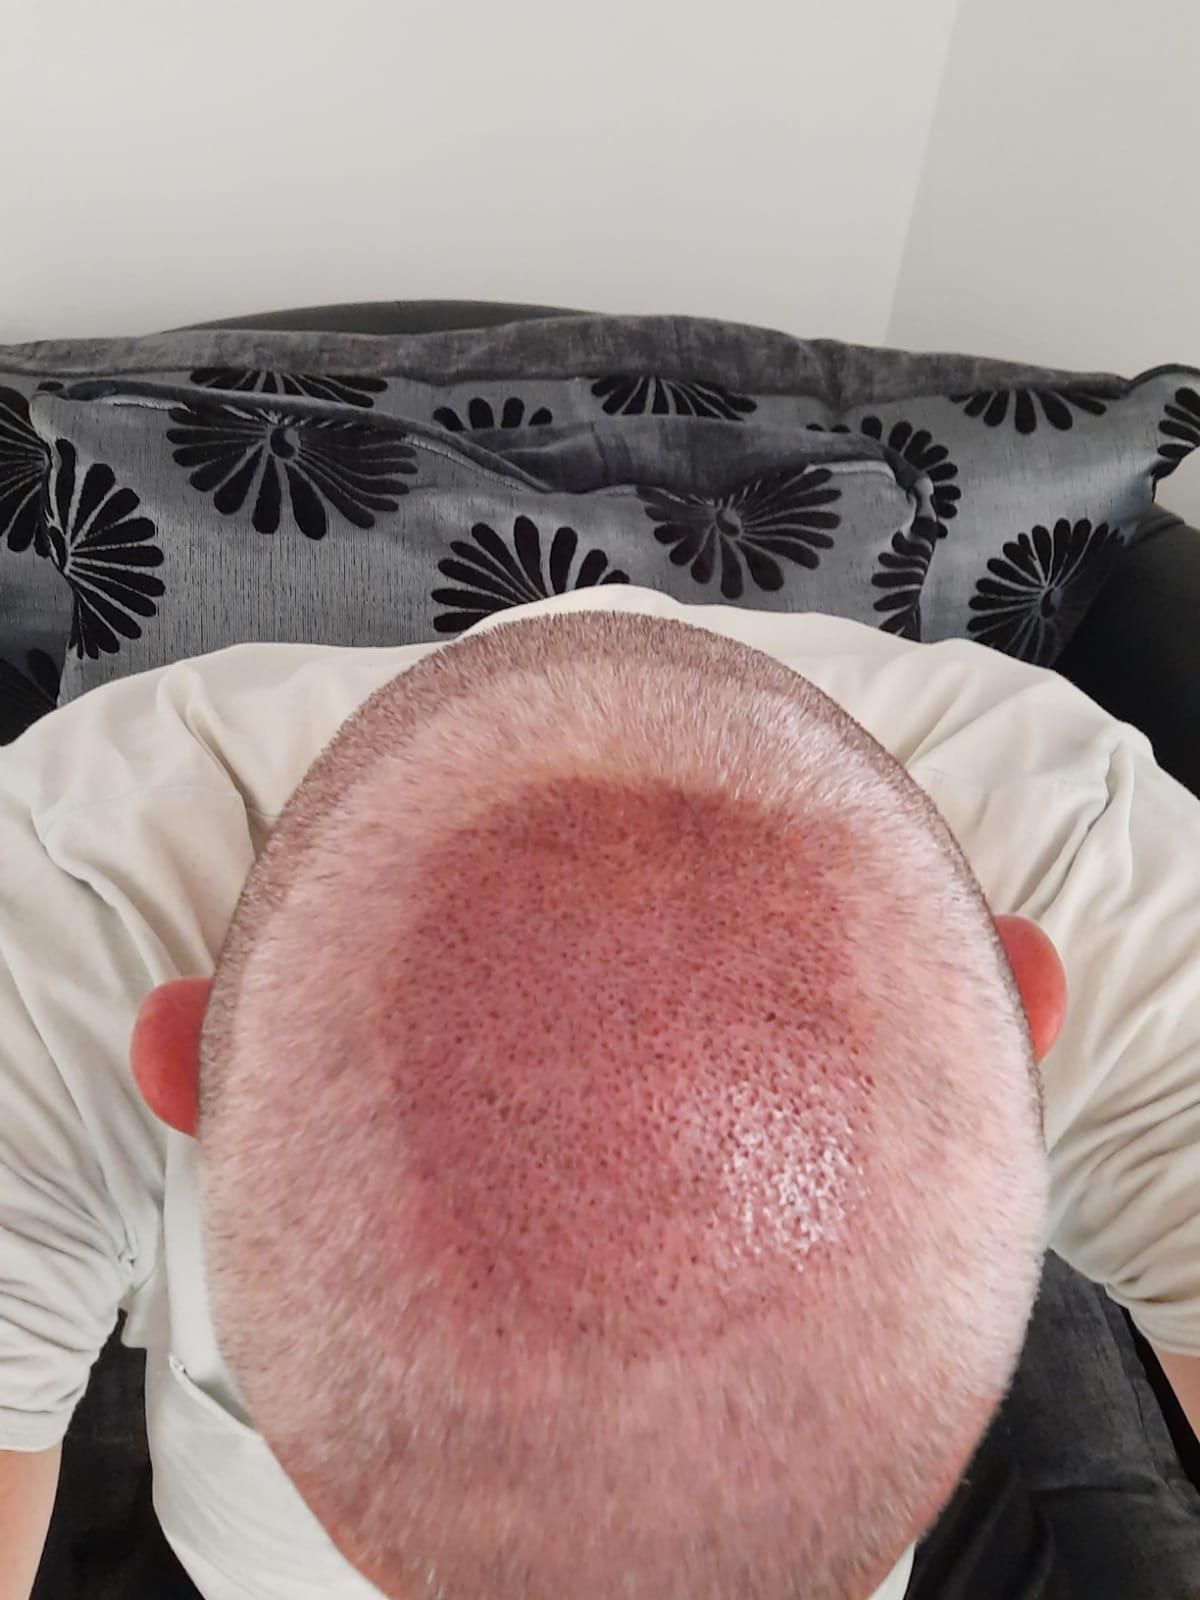 A picture of a male with balding around the crown area